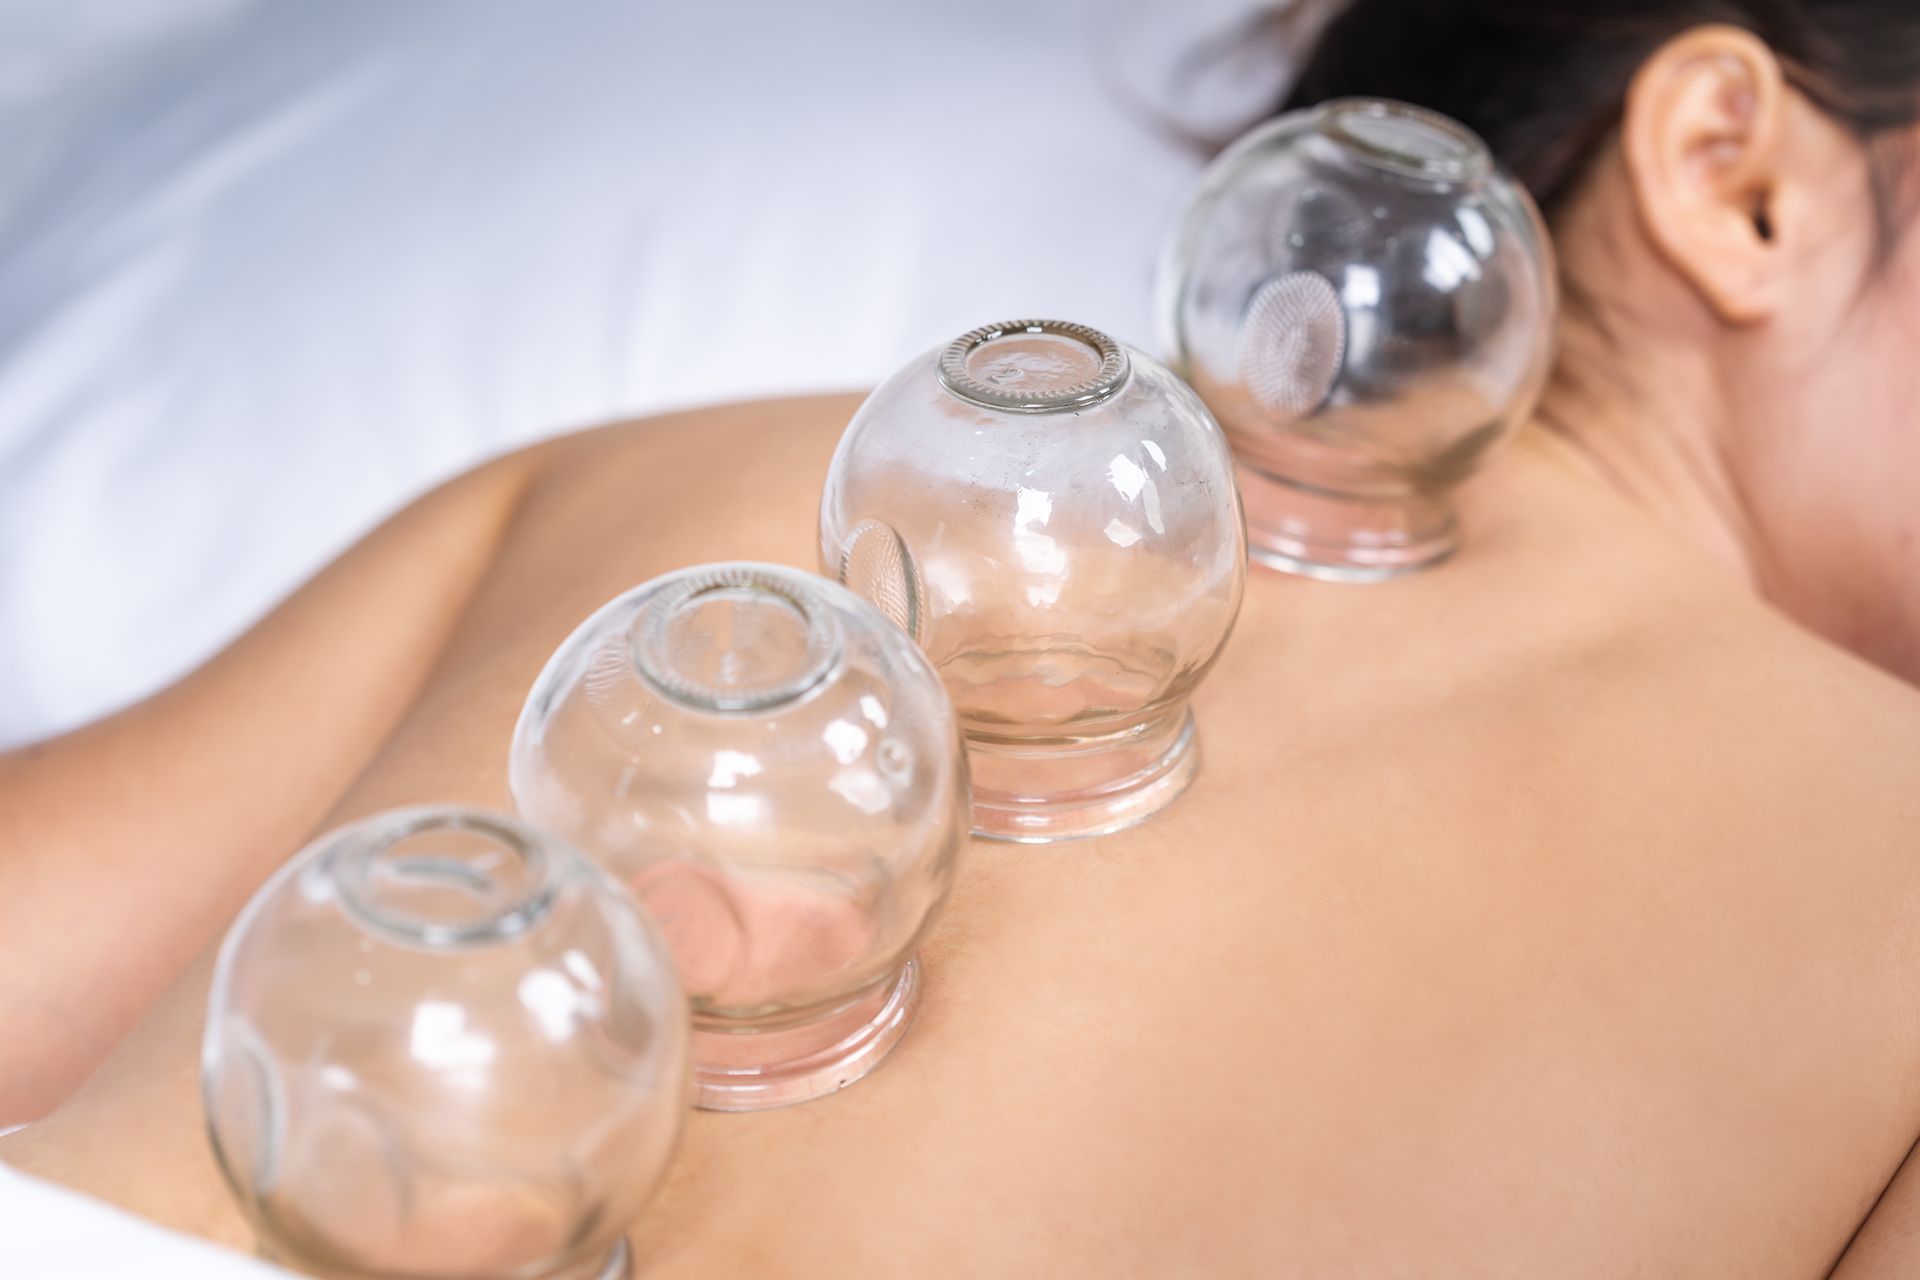 a woman is getting cupping treatment on her back